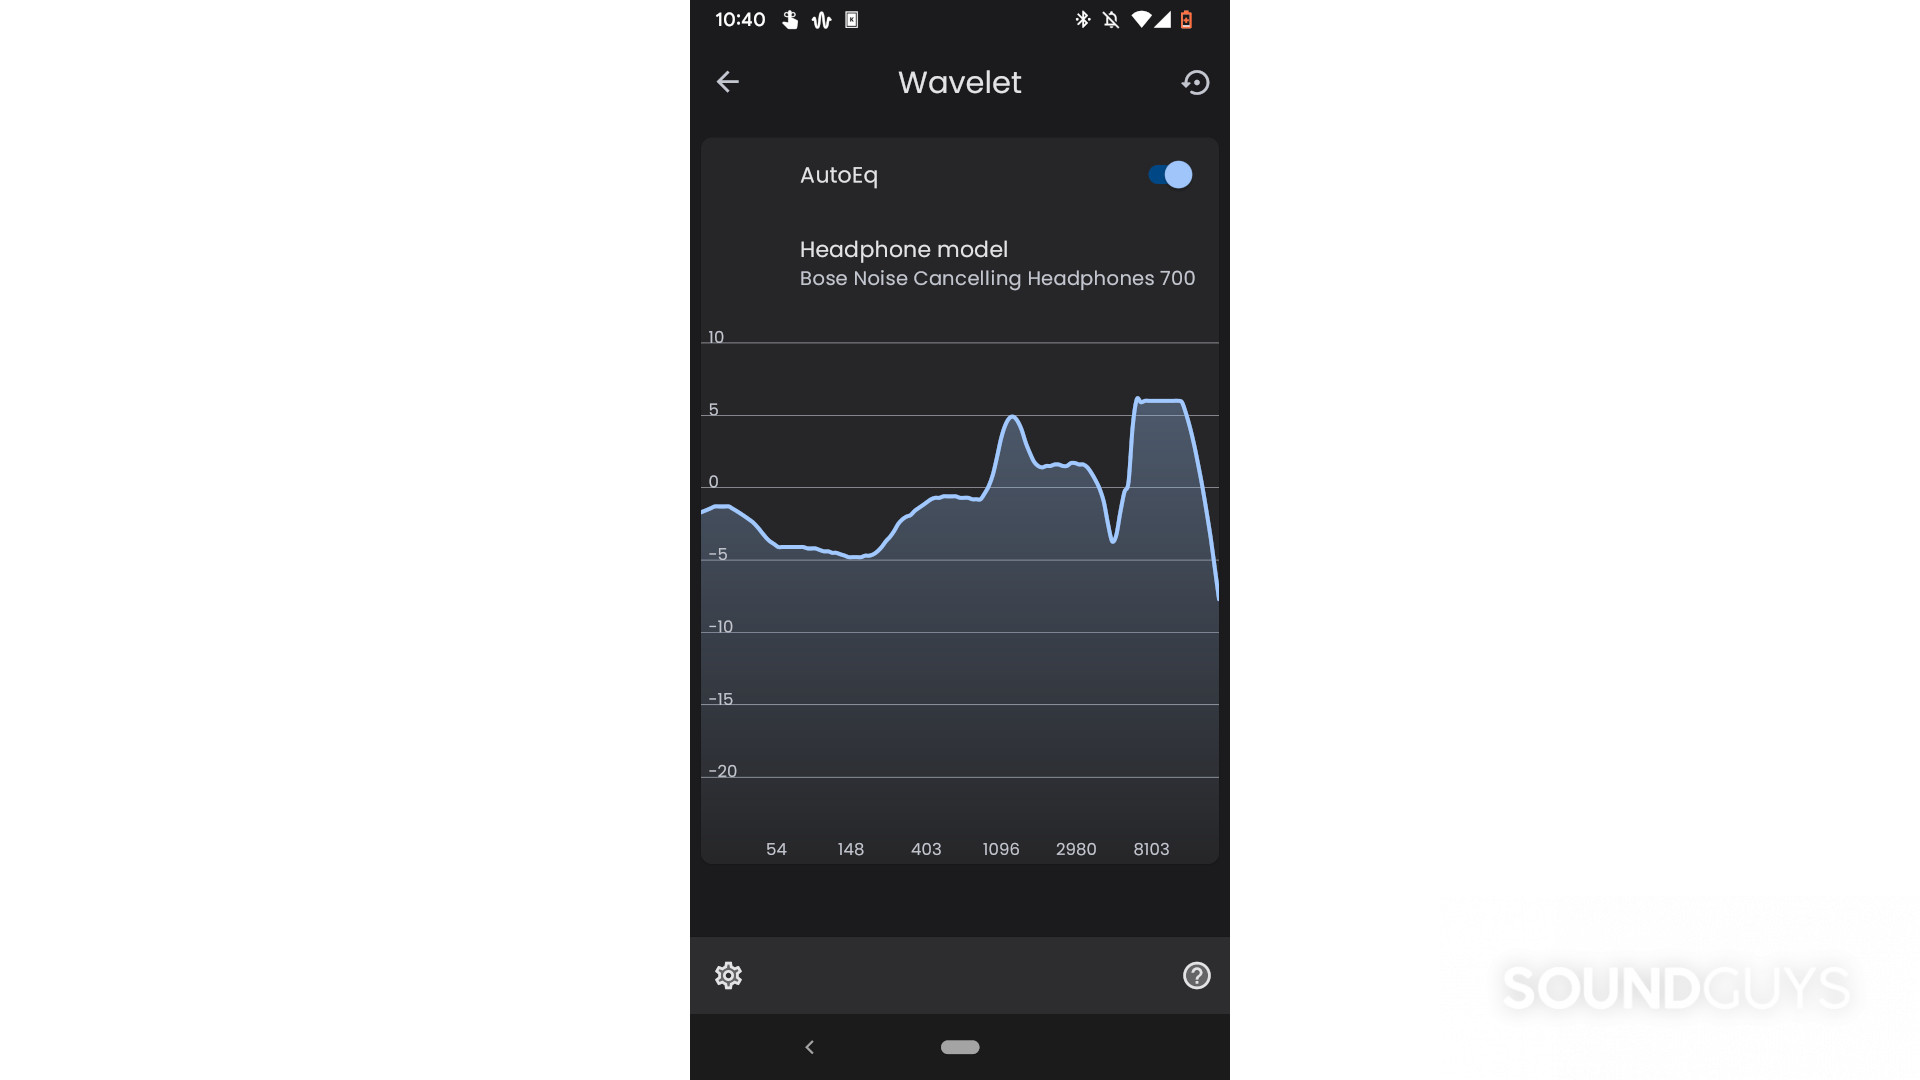 A screenshot of the Wavelet app showing a built-in EQ curve for the Bose Noise Canceling Headphones 700.